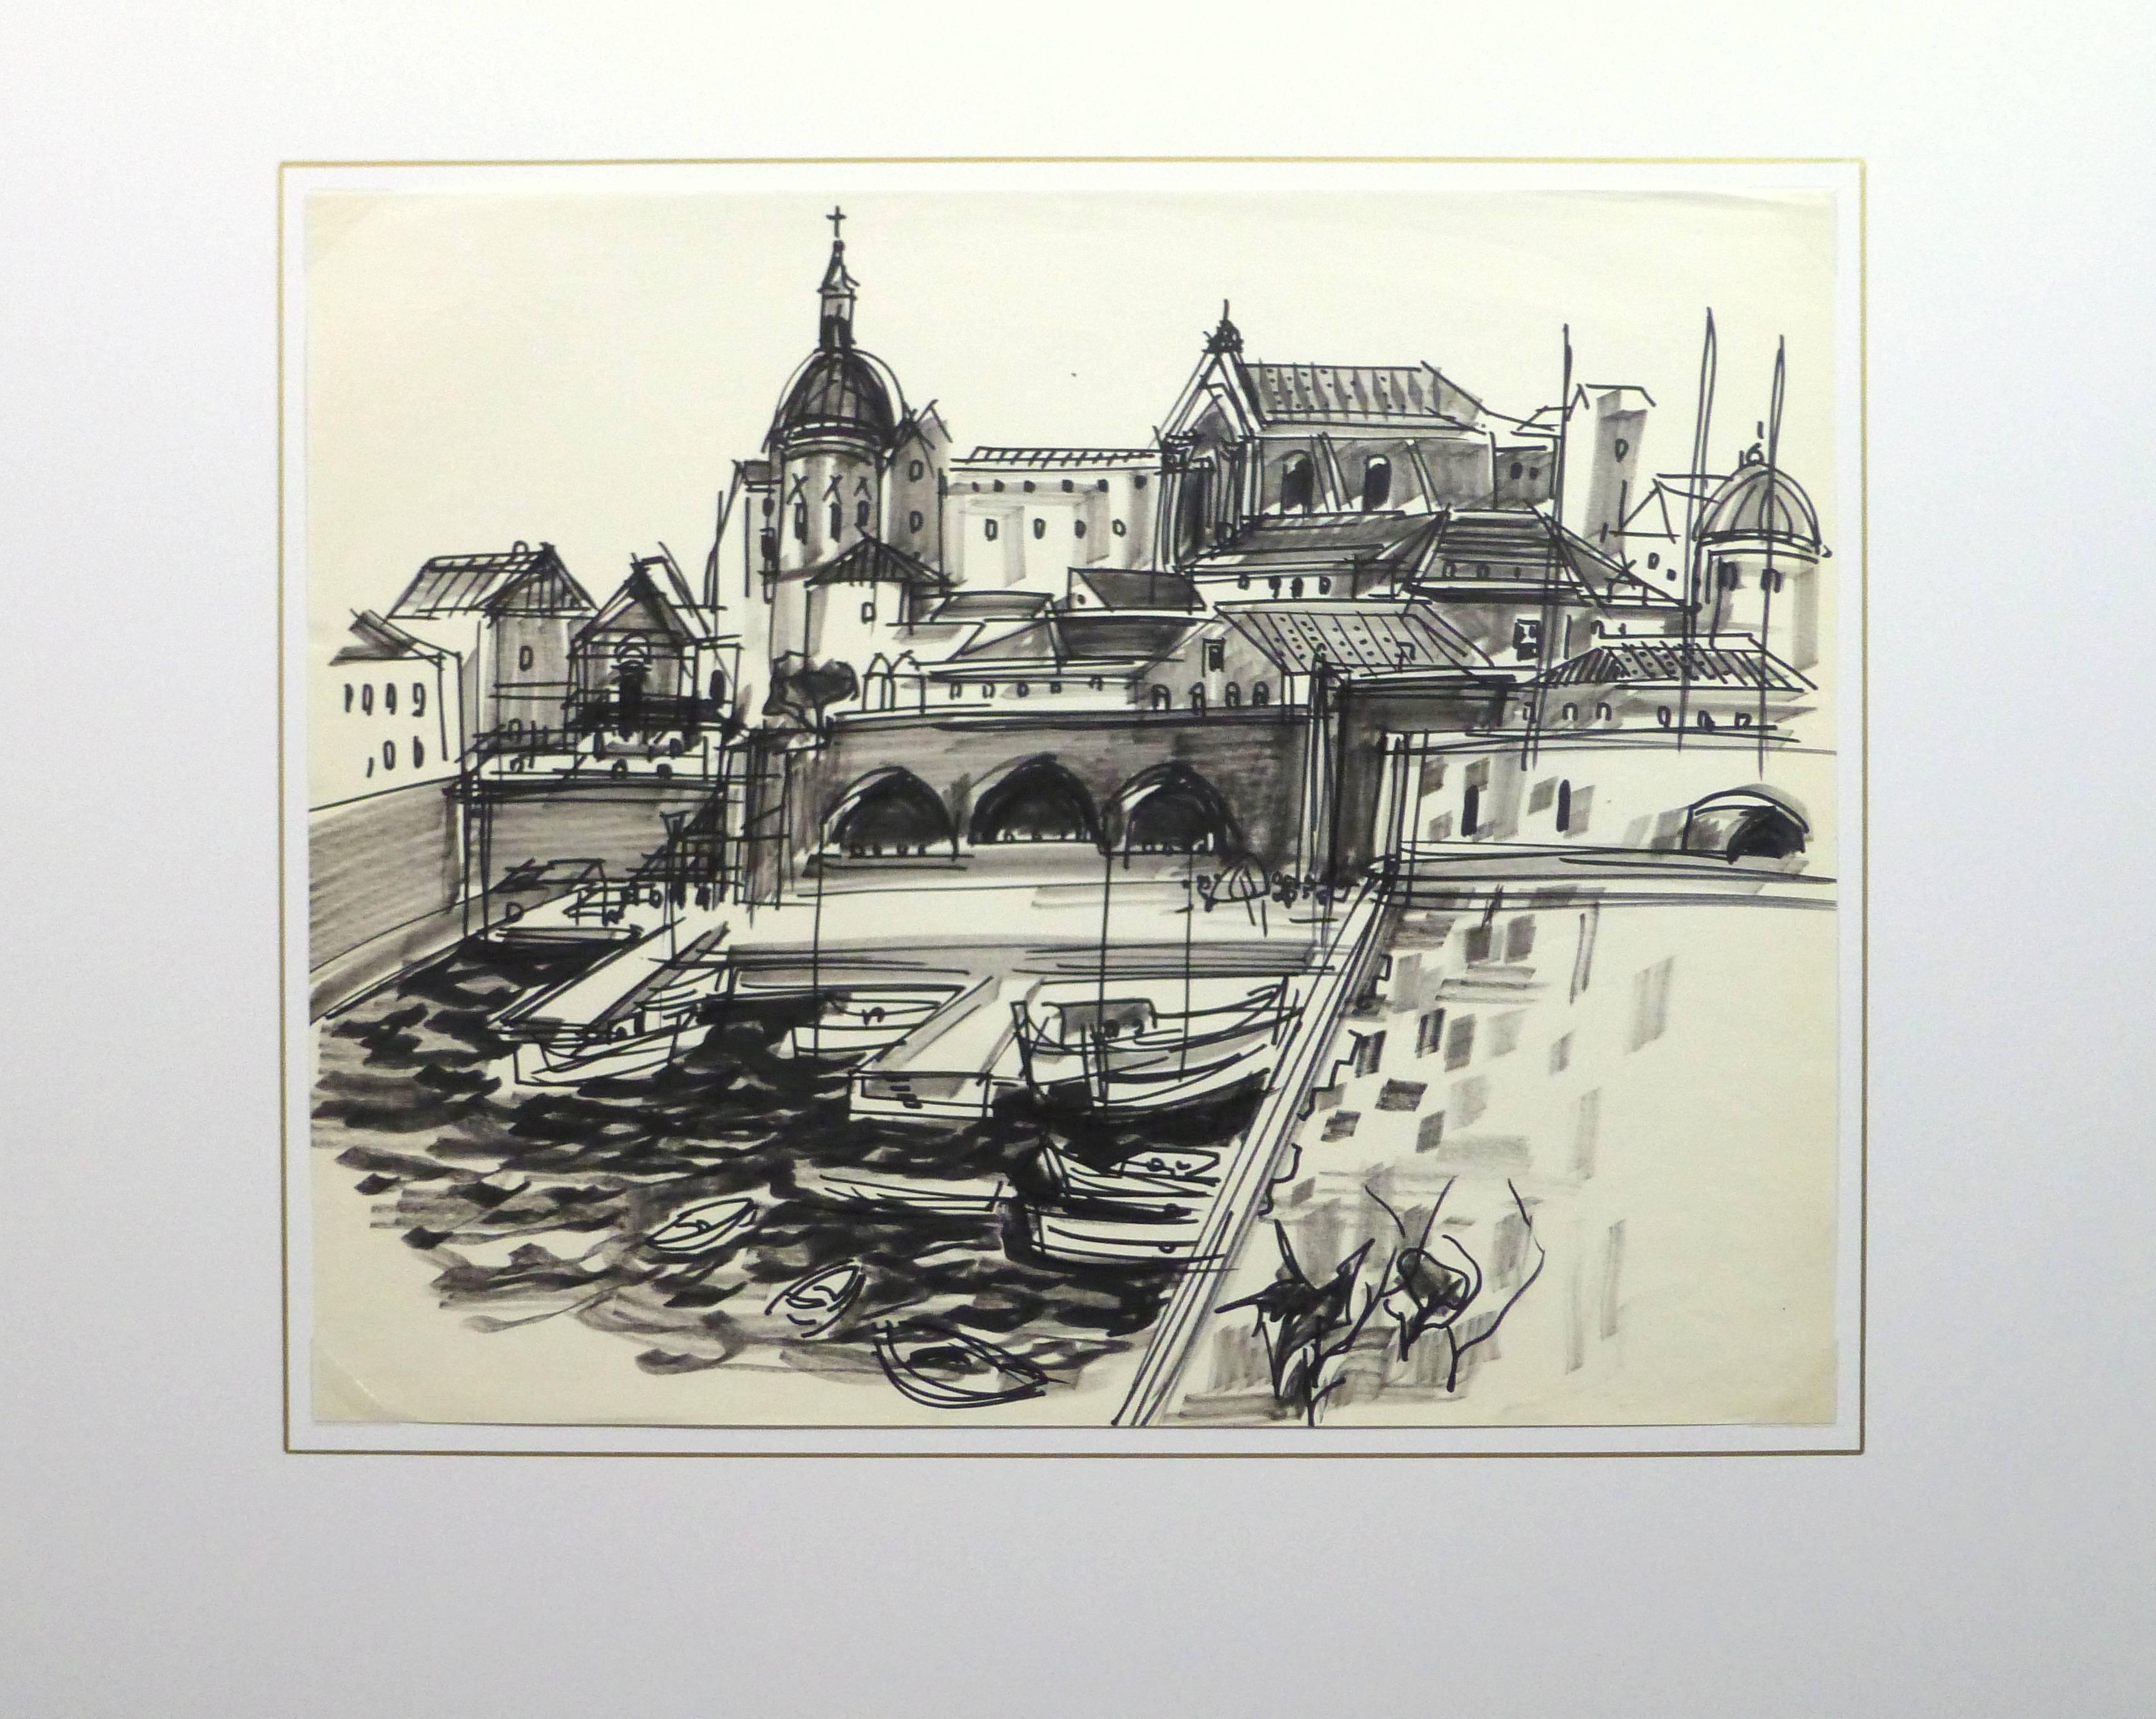 Lovely black and white ink drawing of city buildings surrounding a small marina by French artist Jean Baptiste Grancher (1911-1974), circa 1960.

Original artwork on paper displayed on a white mat with a gold border. Archival plastic sleeve and